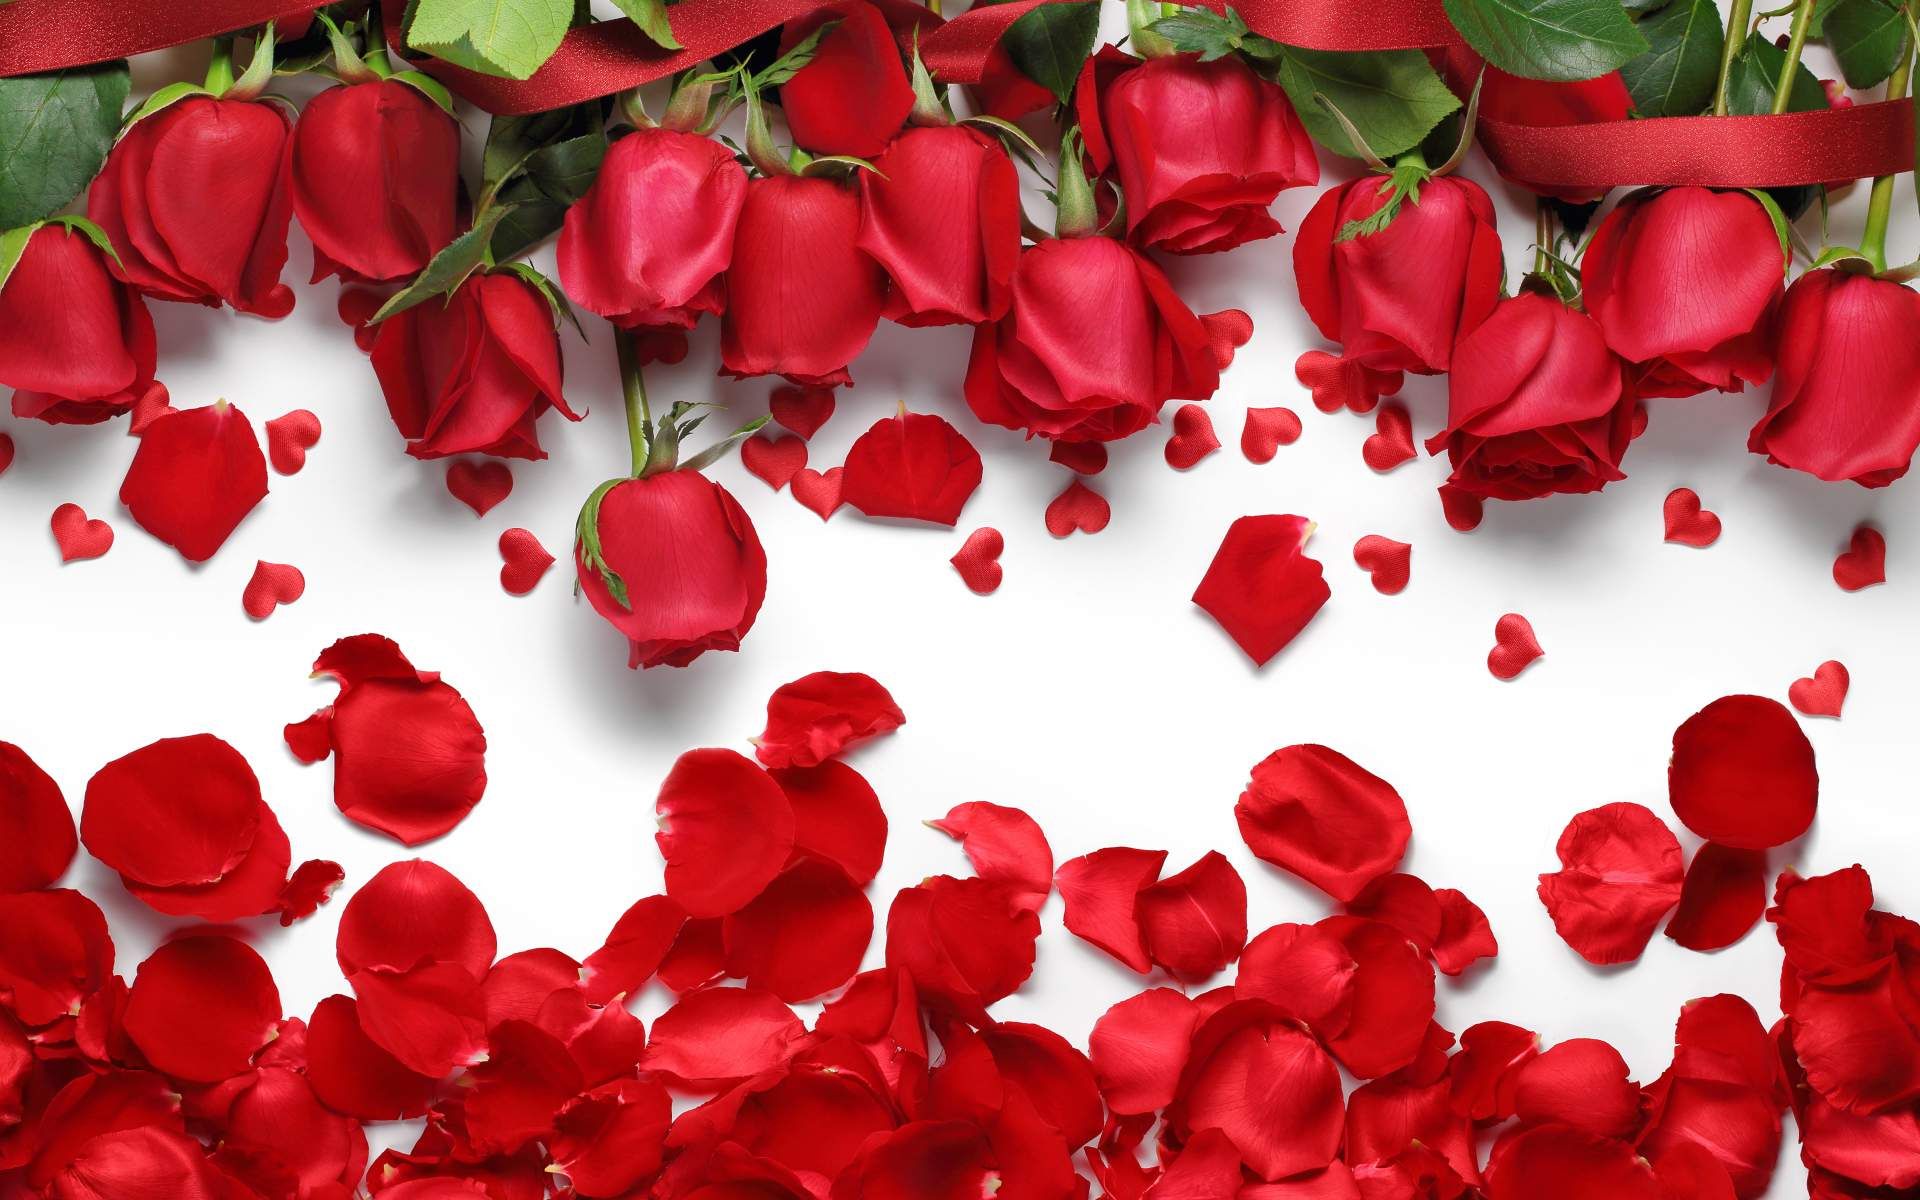 Red Rose Petals and Flowers Wallpaper for desktop and mobile in high ...